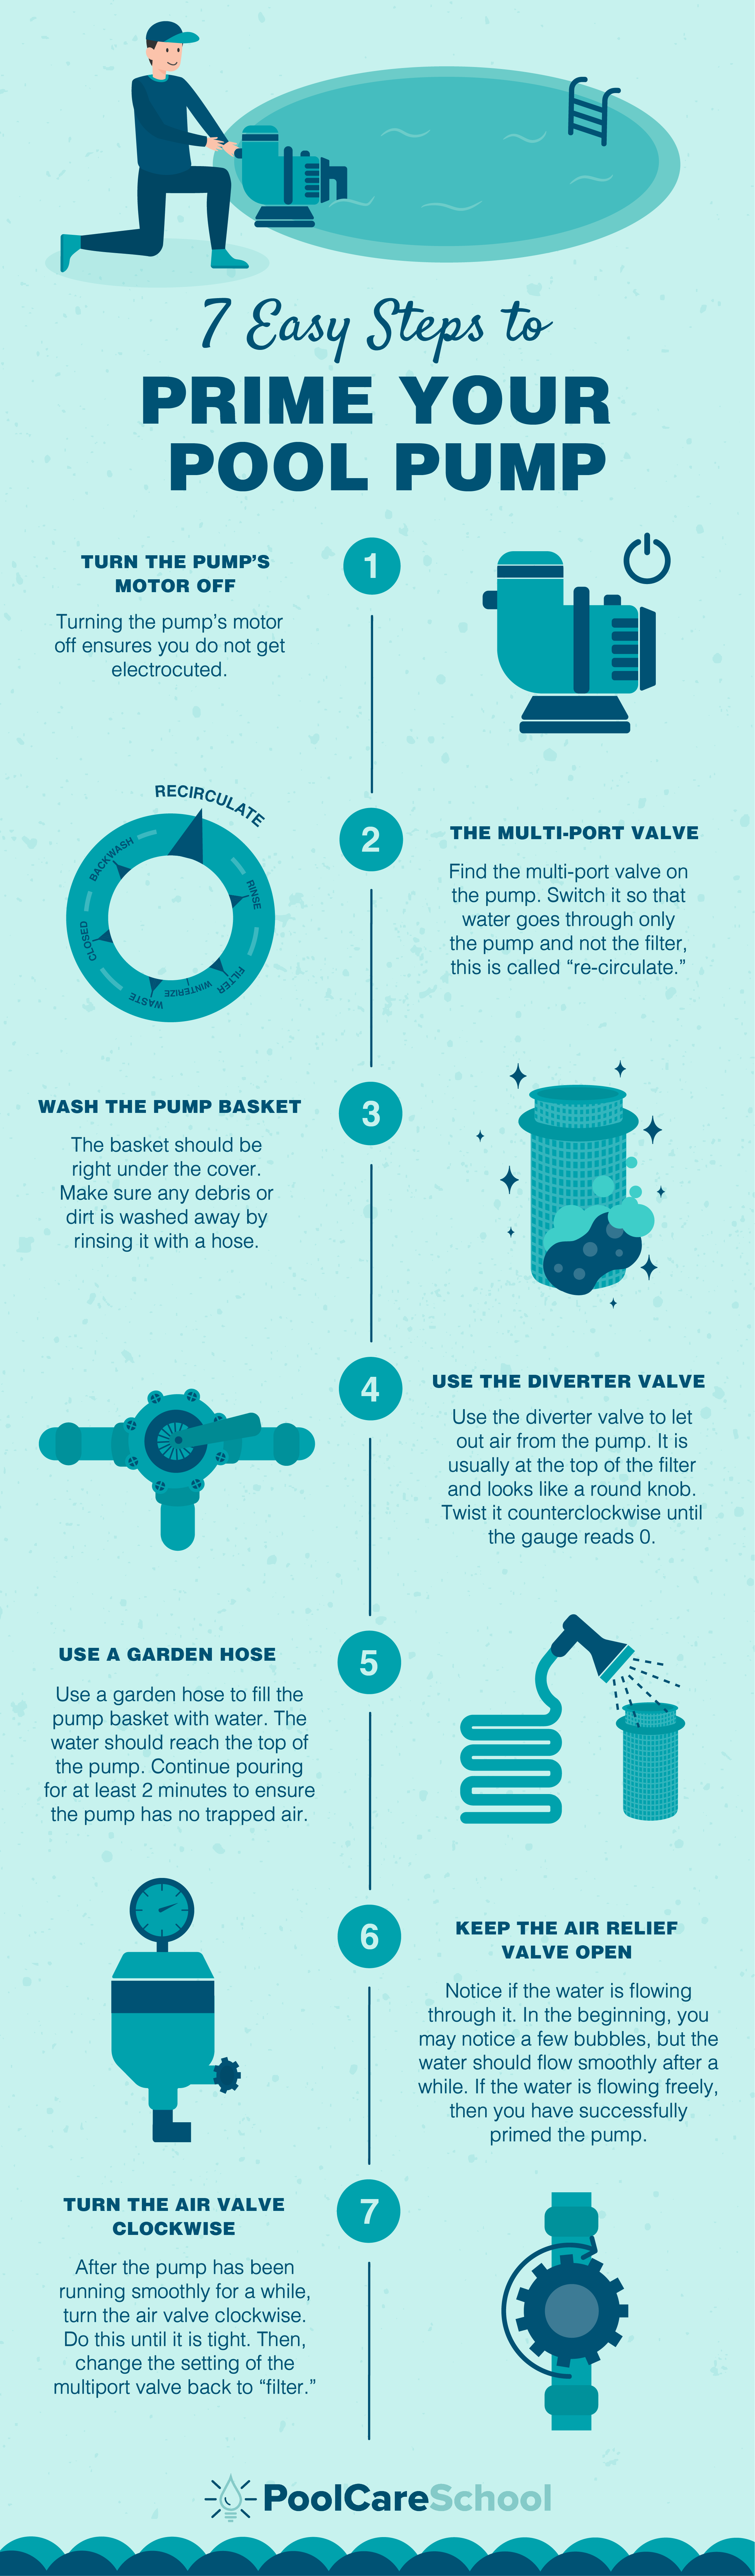 how to prime a pool pump